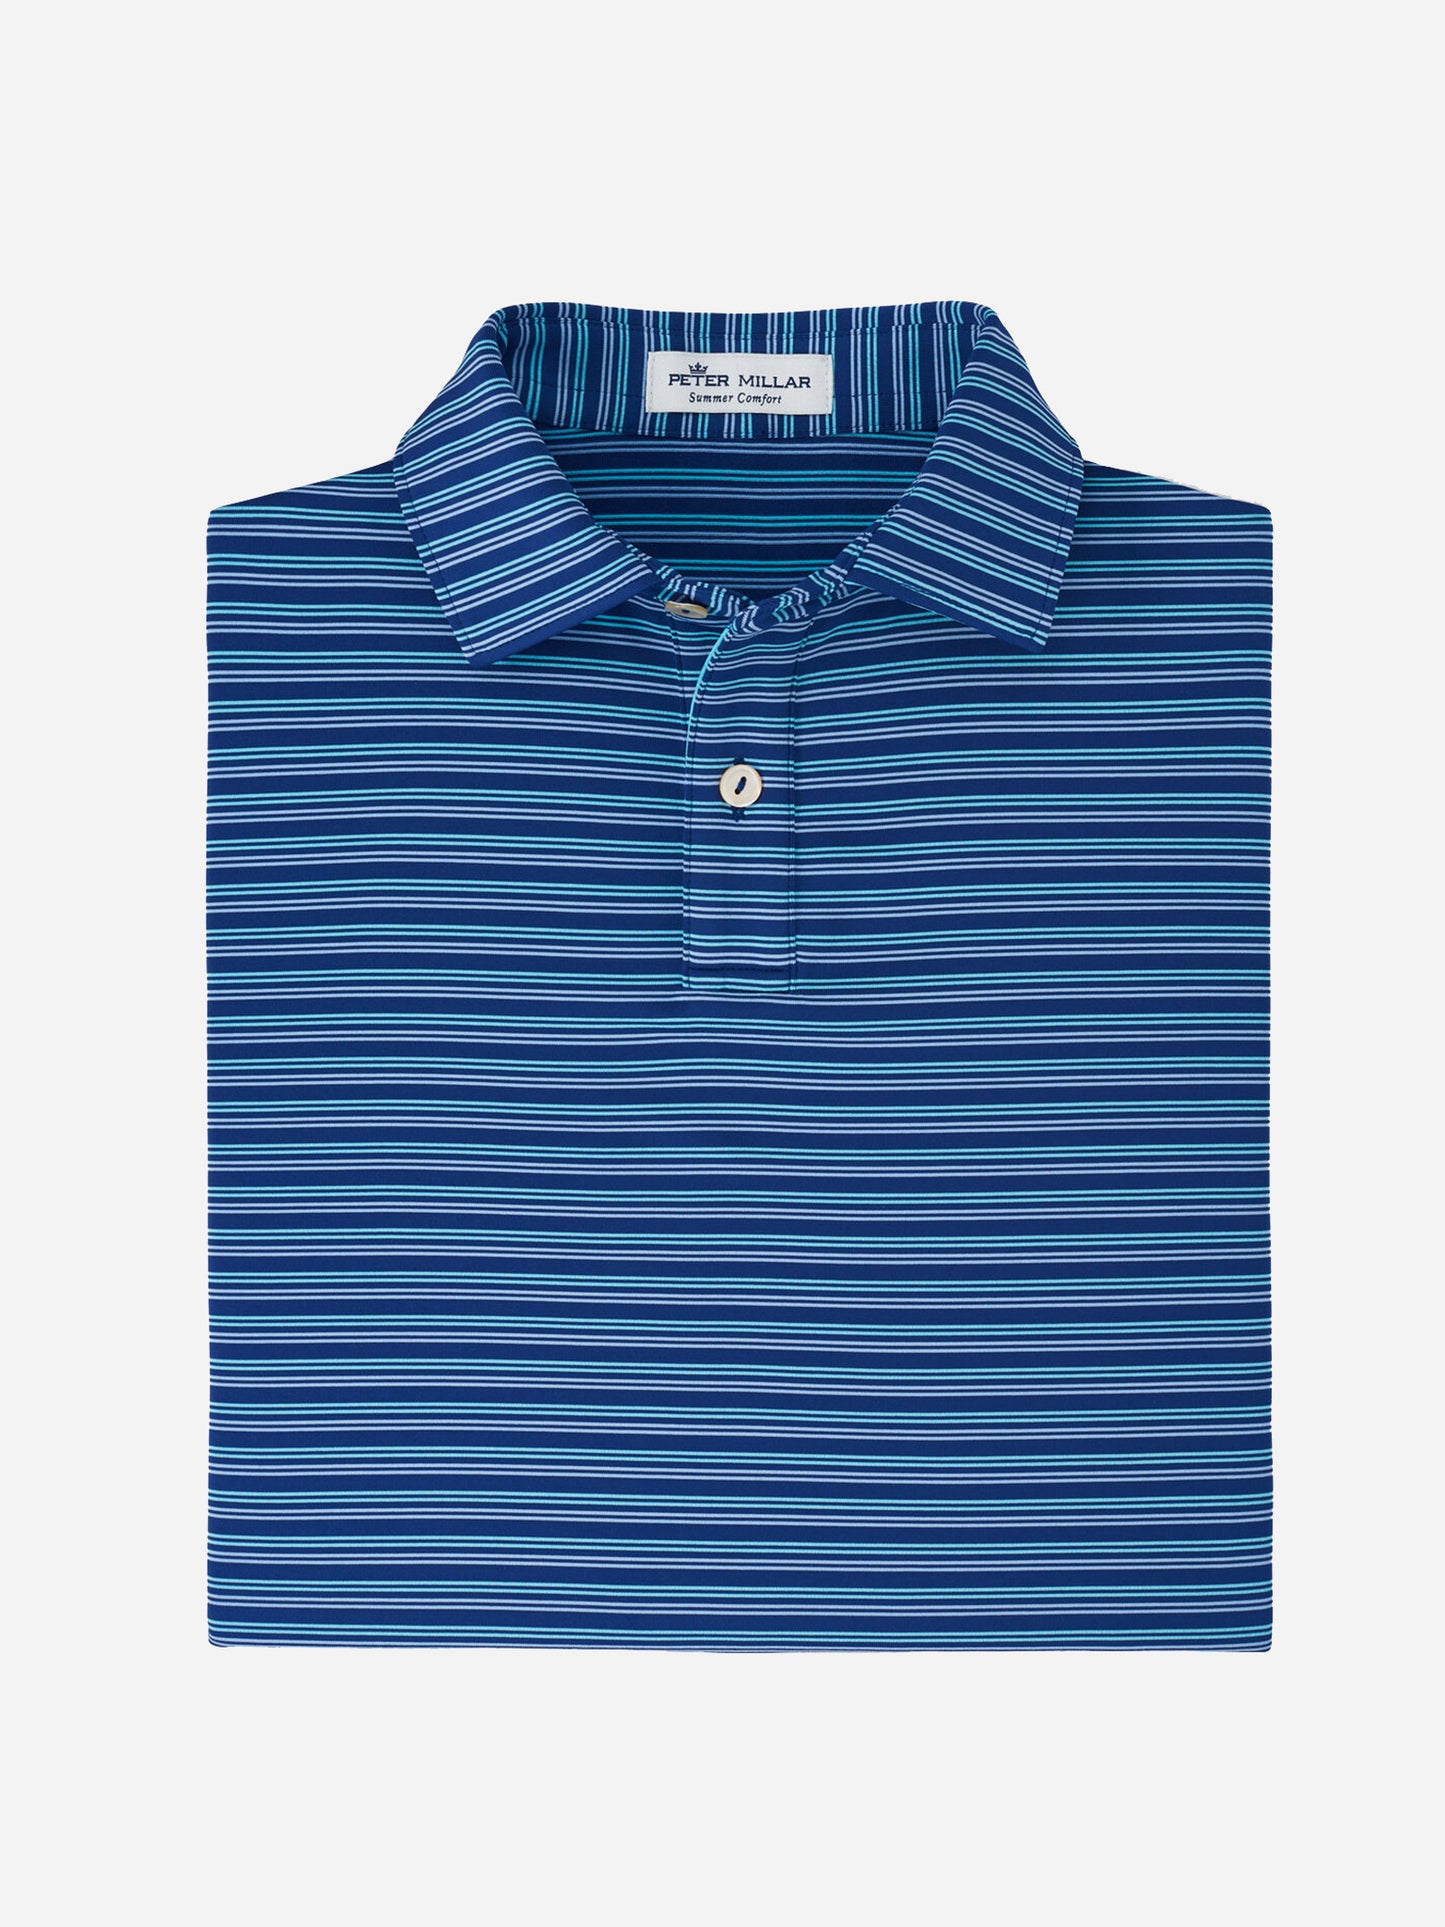 Peter Millar Youth Collection Boys' Dunn Performance Jersey Polo